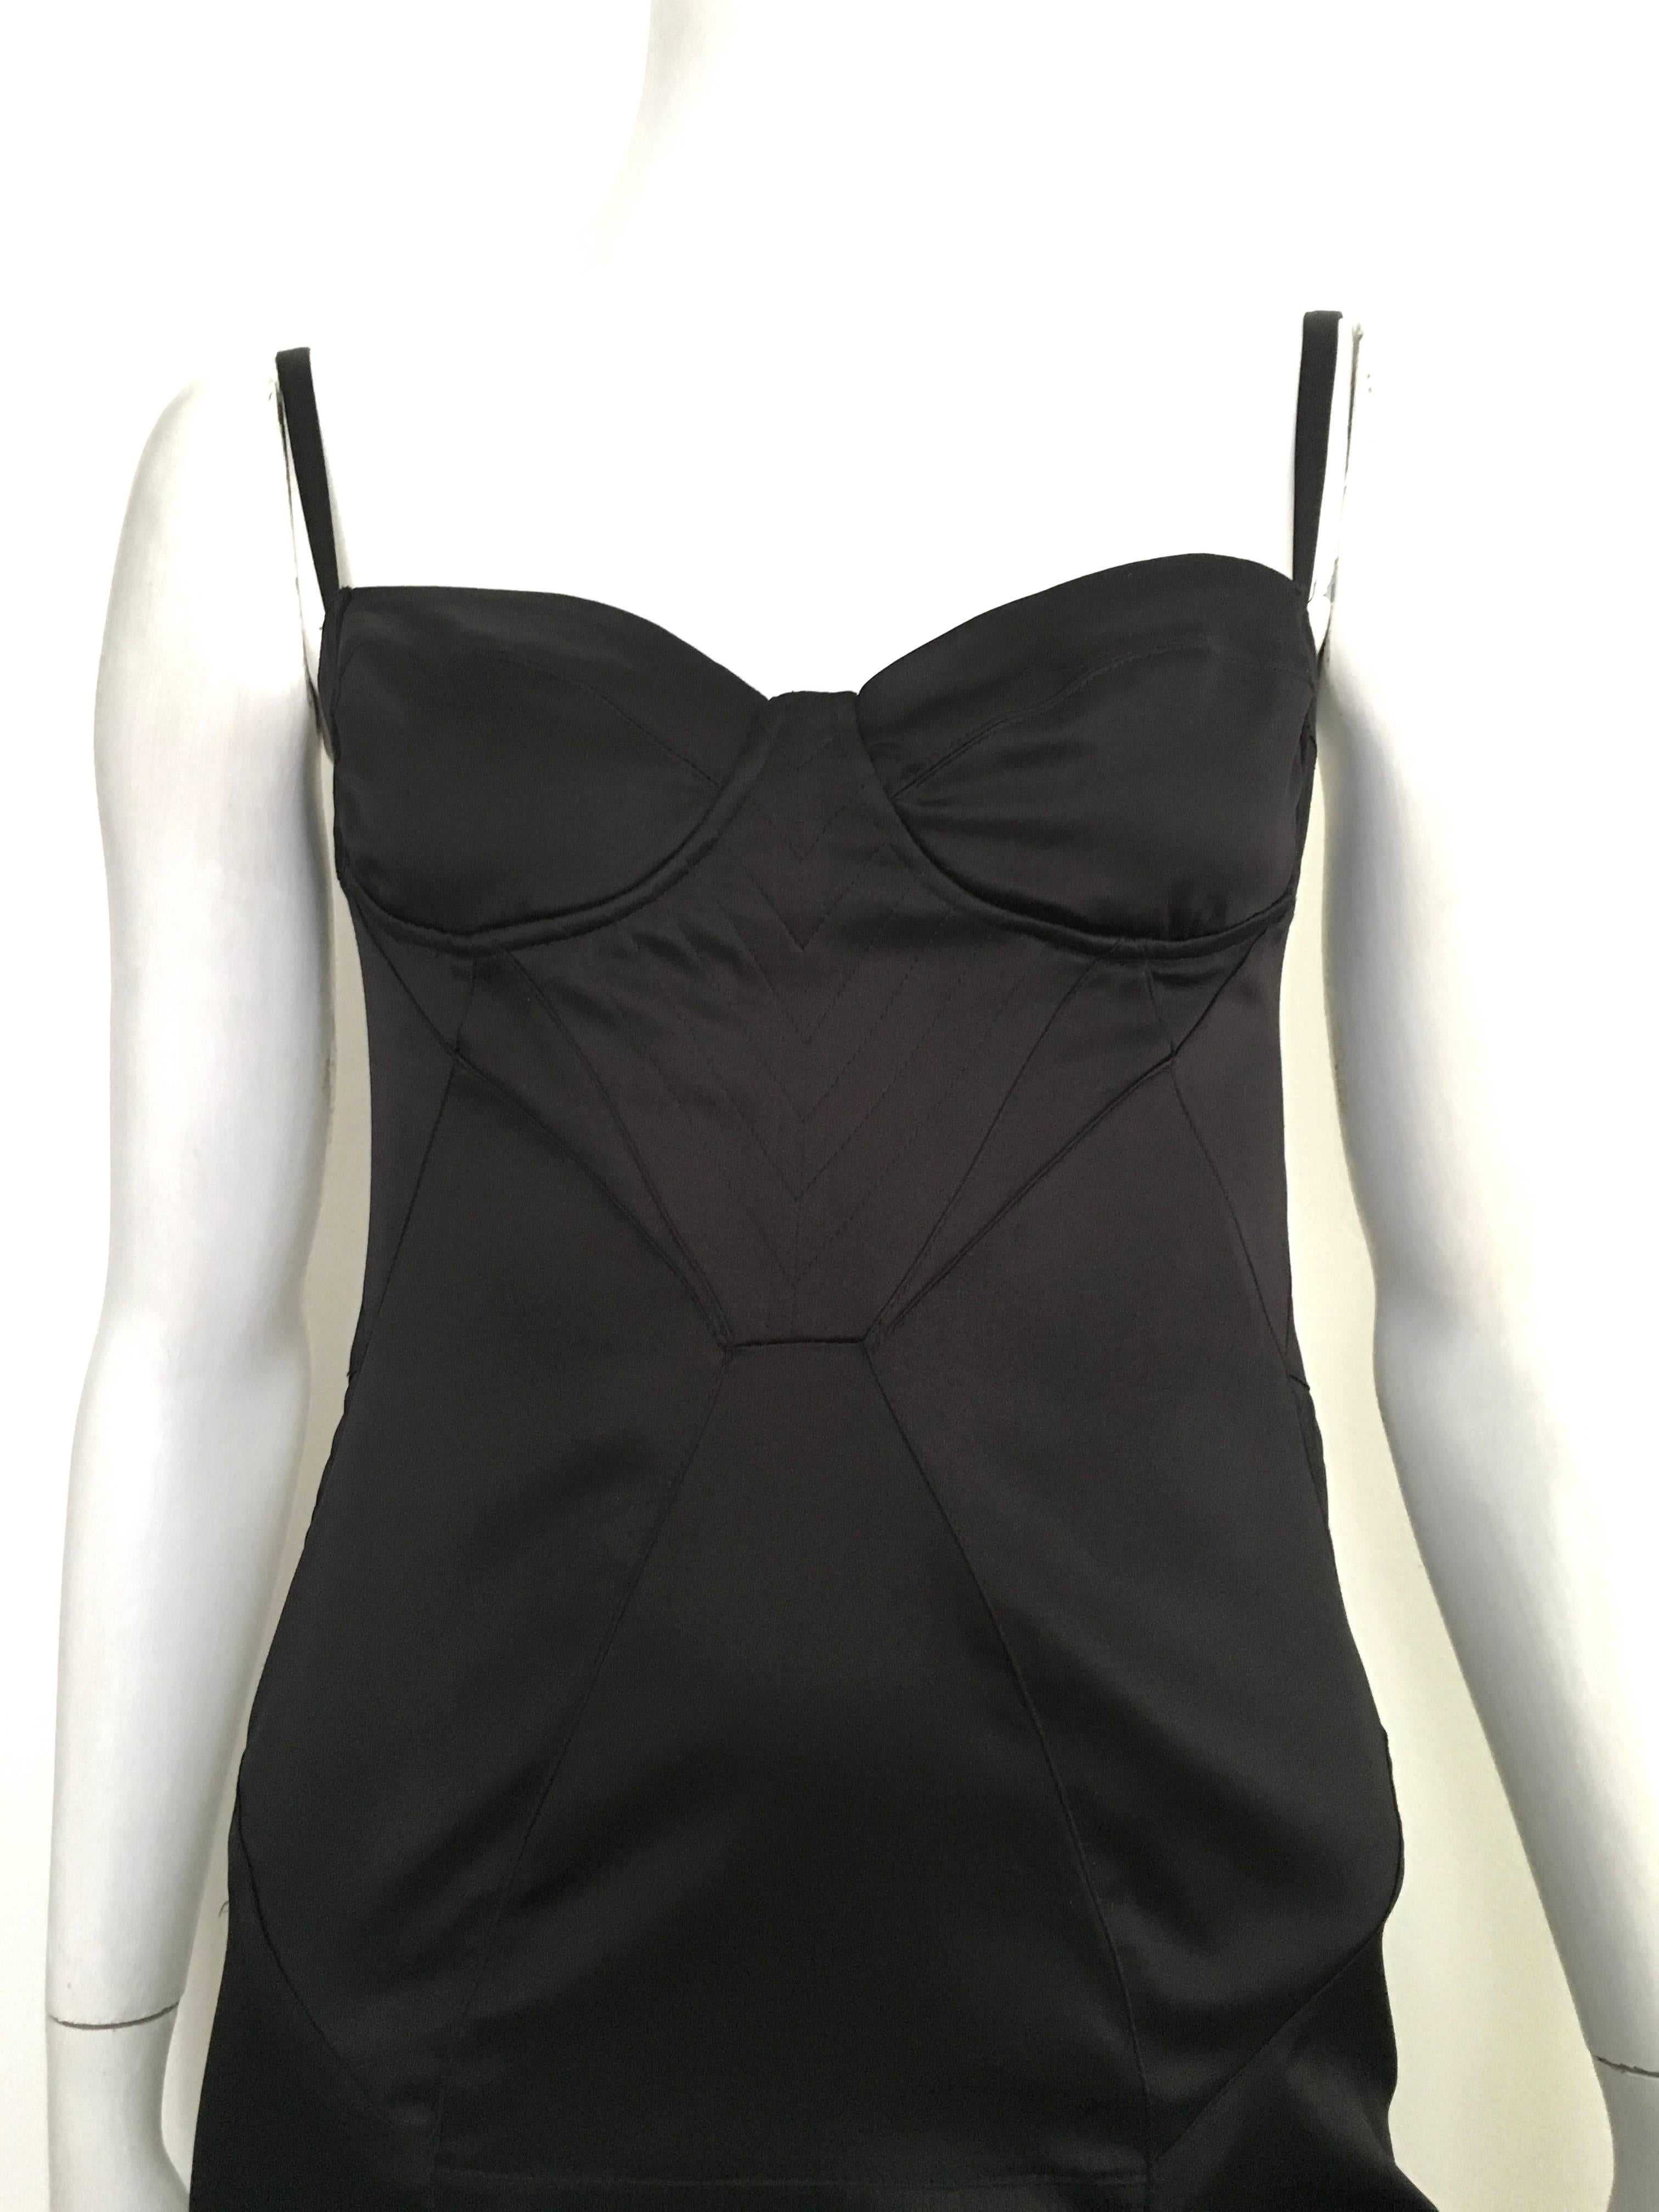 Just Cavalli by Roberto Cavalli black stretch dress is an Italian size 44 but fits like a USA size 4.  Ladies please use your measuring tape so you can properly measure your lovely body so you know this will fit you to perfection. Interior wire